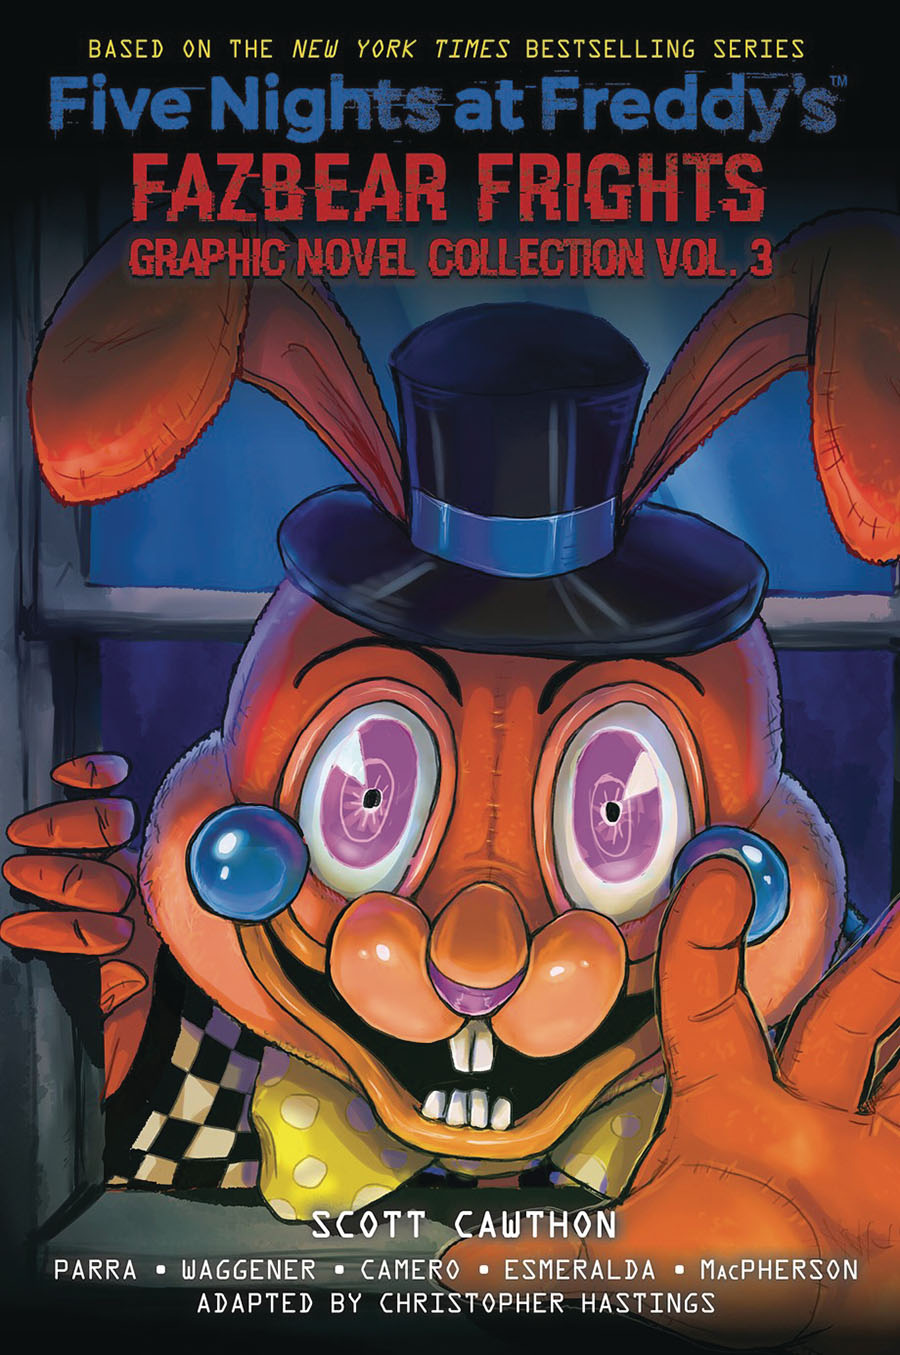 Five Nights At Freddys Fazbear Frights Graphic Novel Collection Vol 3 TP